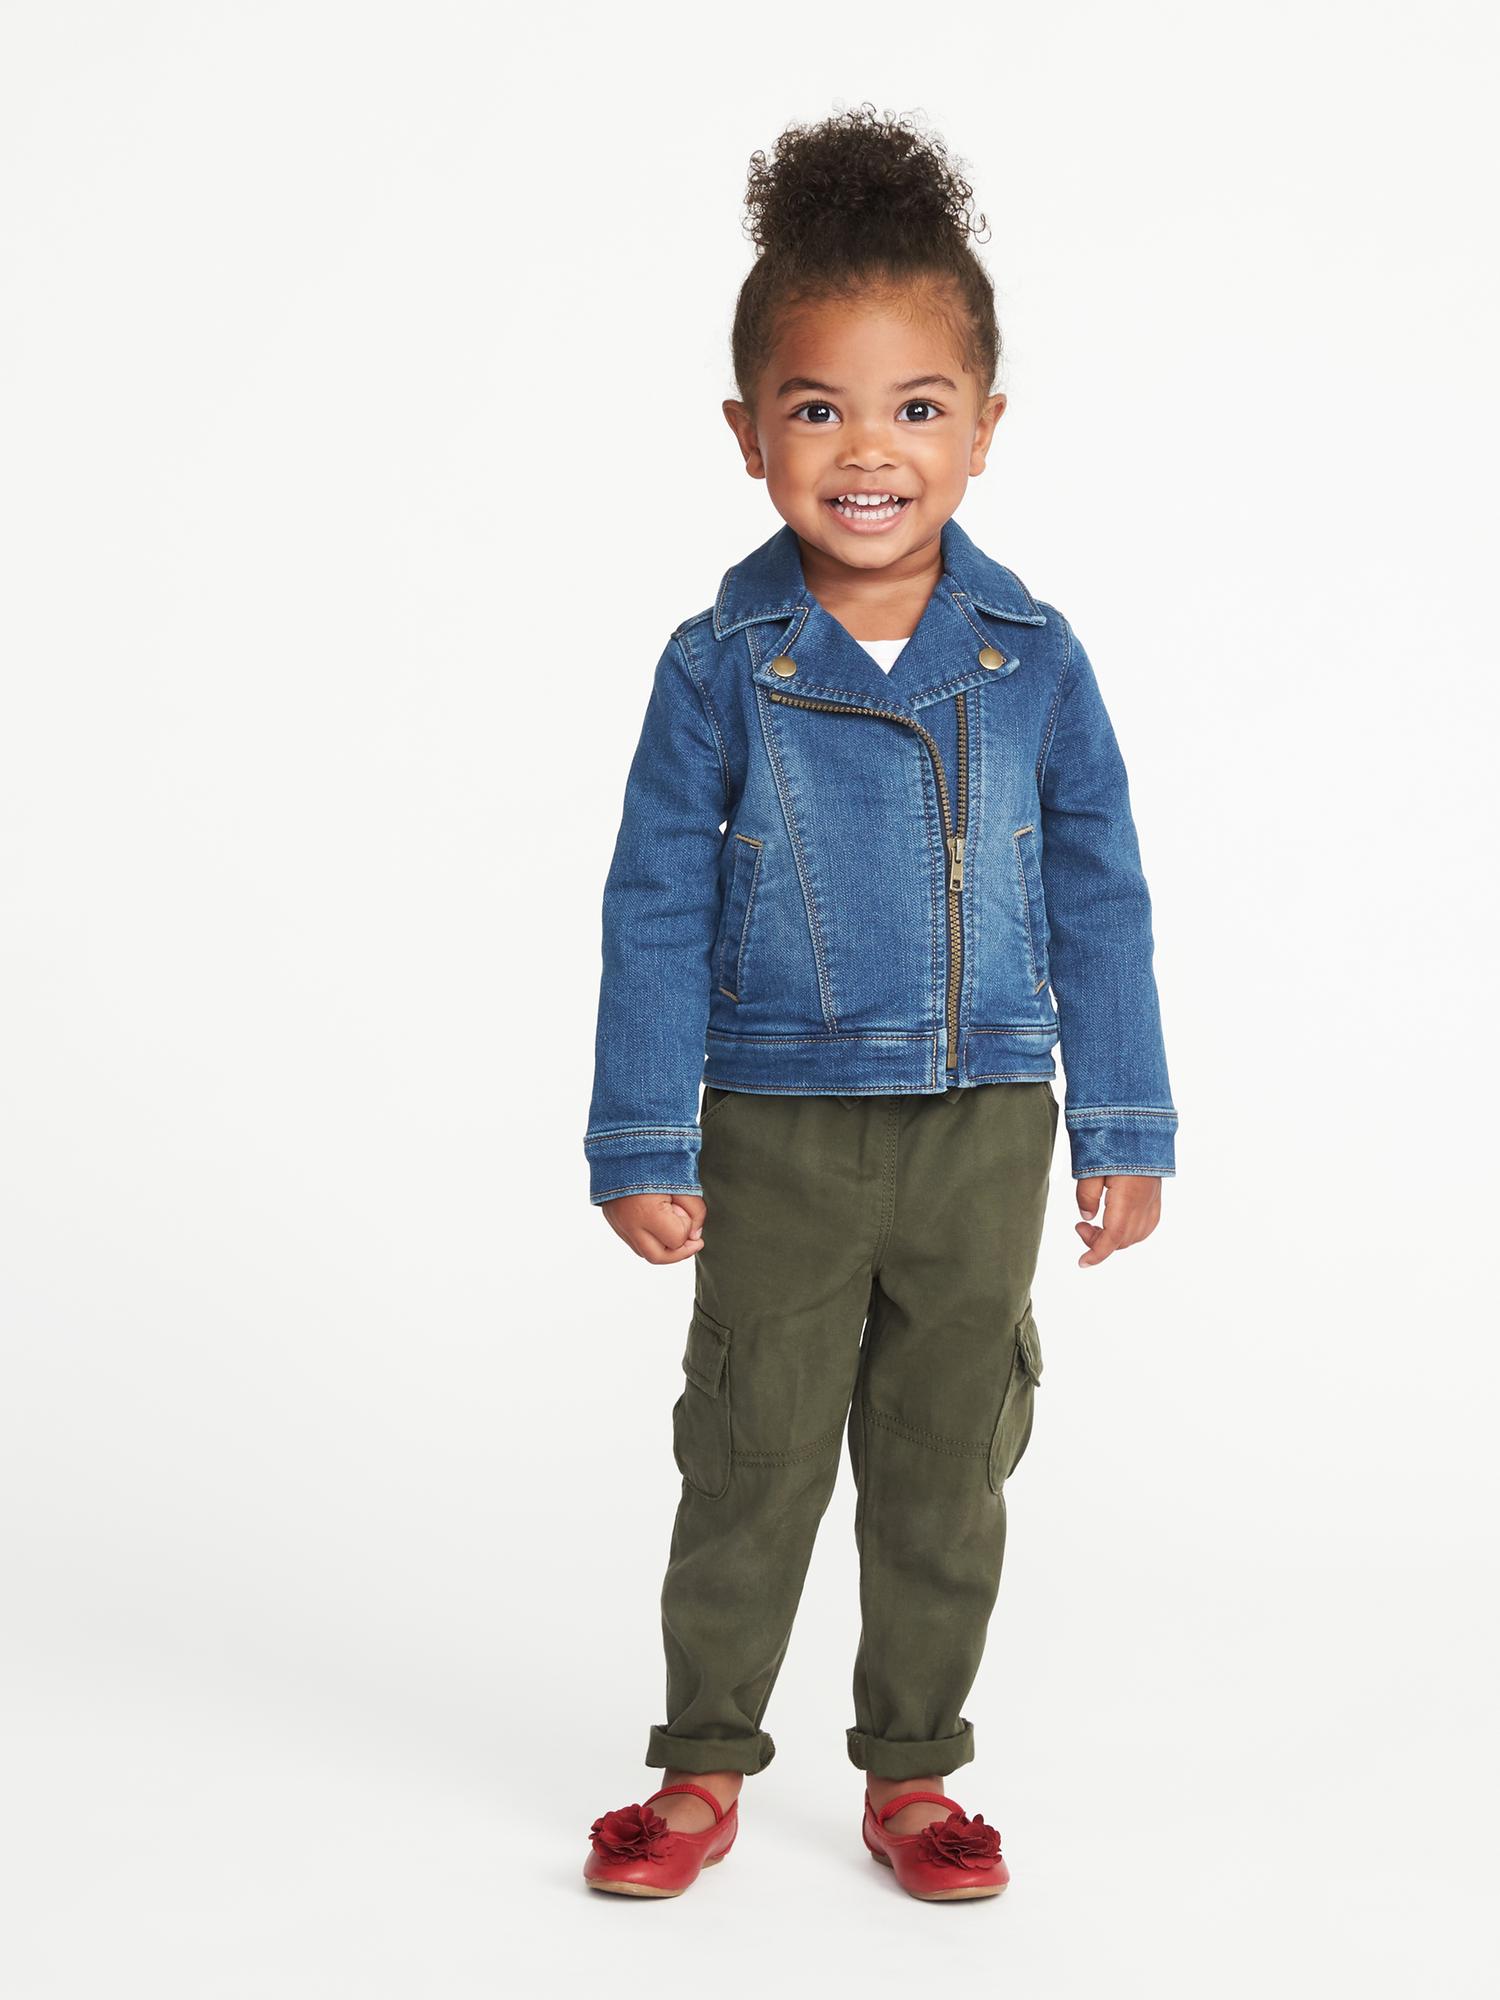 Khakis & a jean jacket pair perfectly with Converse | Toddler boy jeans,  Cute baby boy outfits, Baby boy jeans